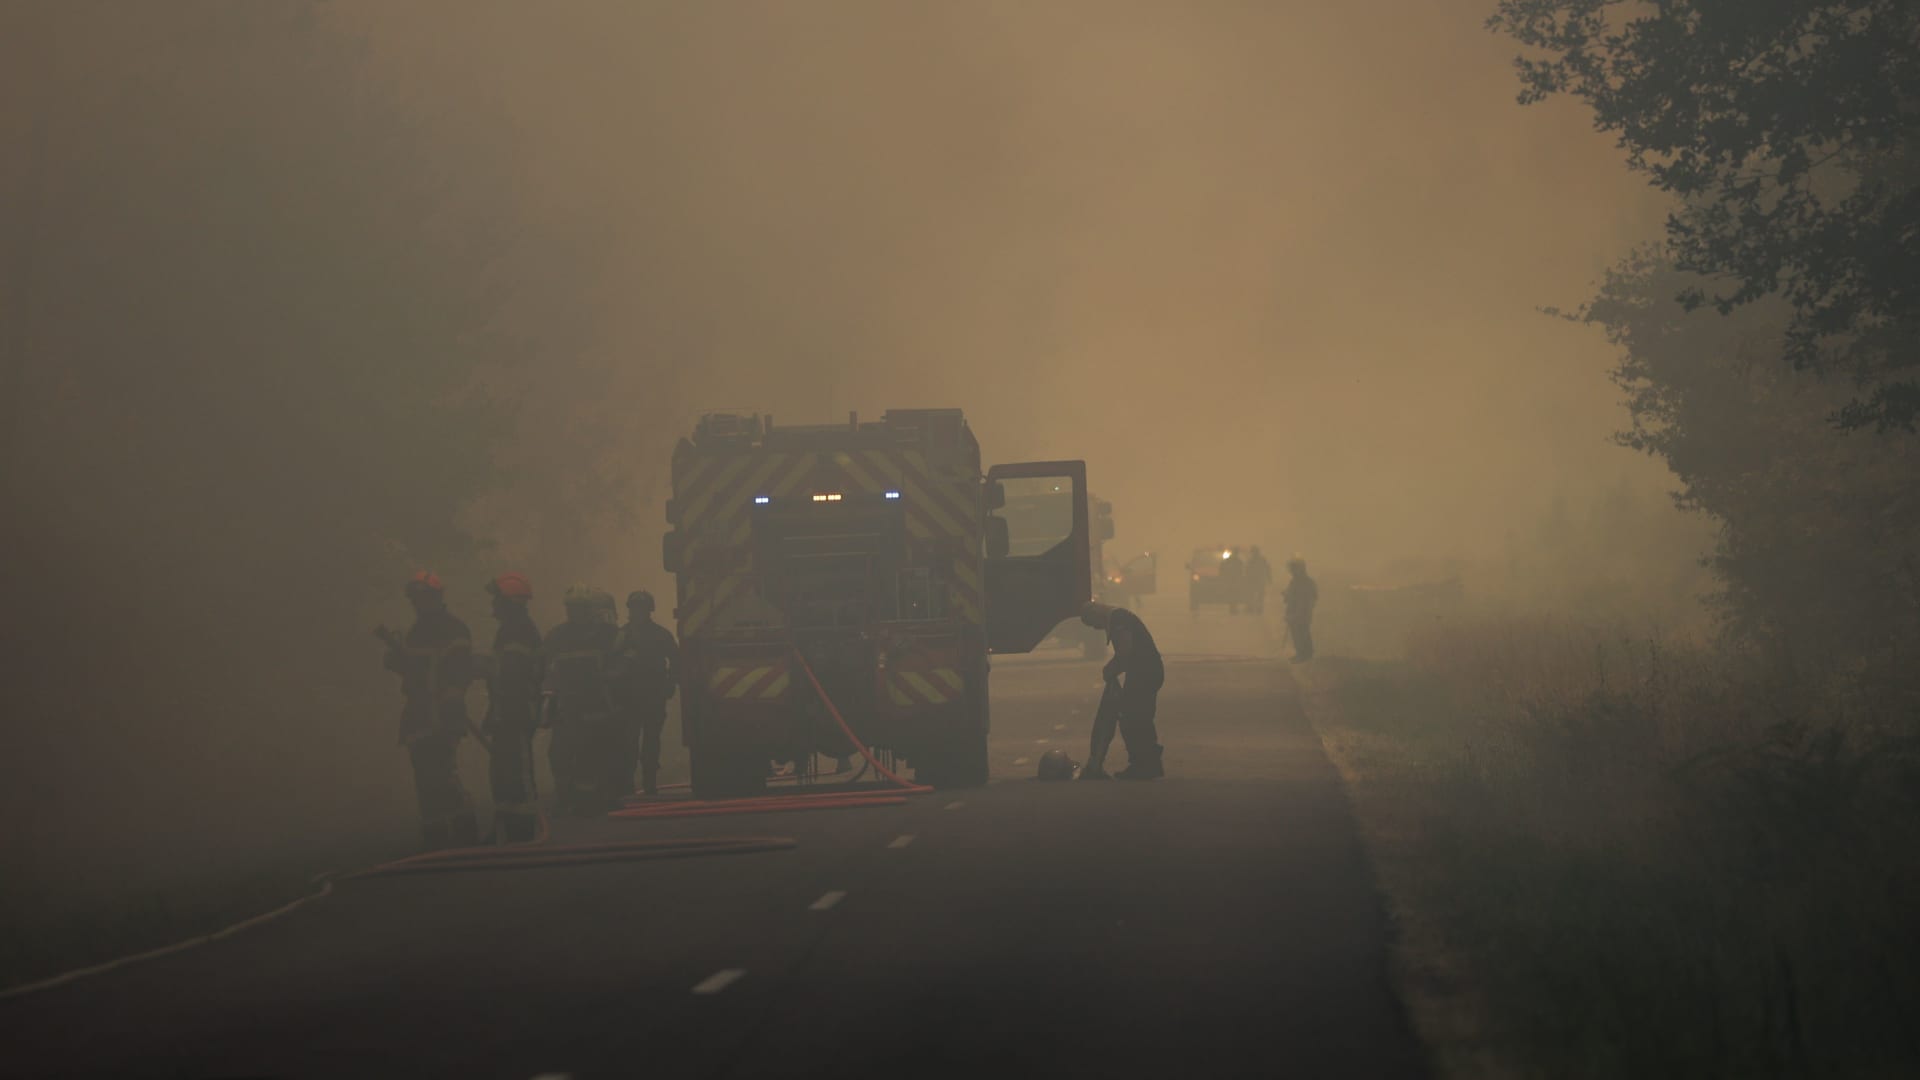 Firefighters try to control a forest fire near Louchats in Gironde, southwestern France on July 17, 2022.